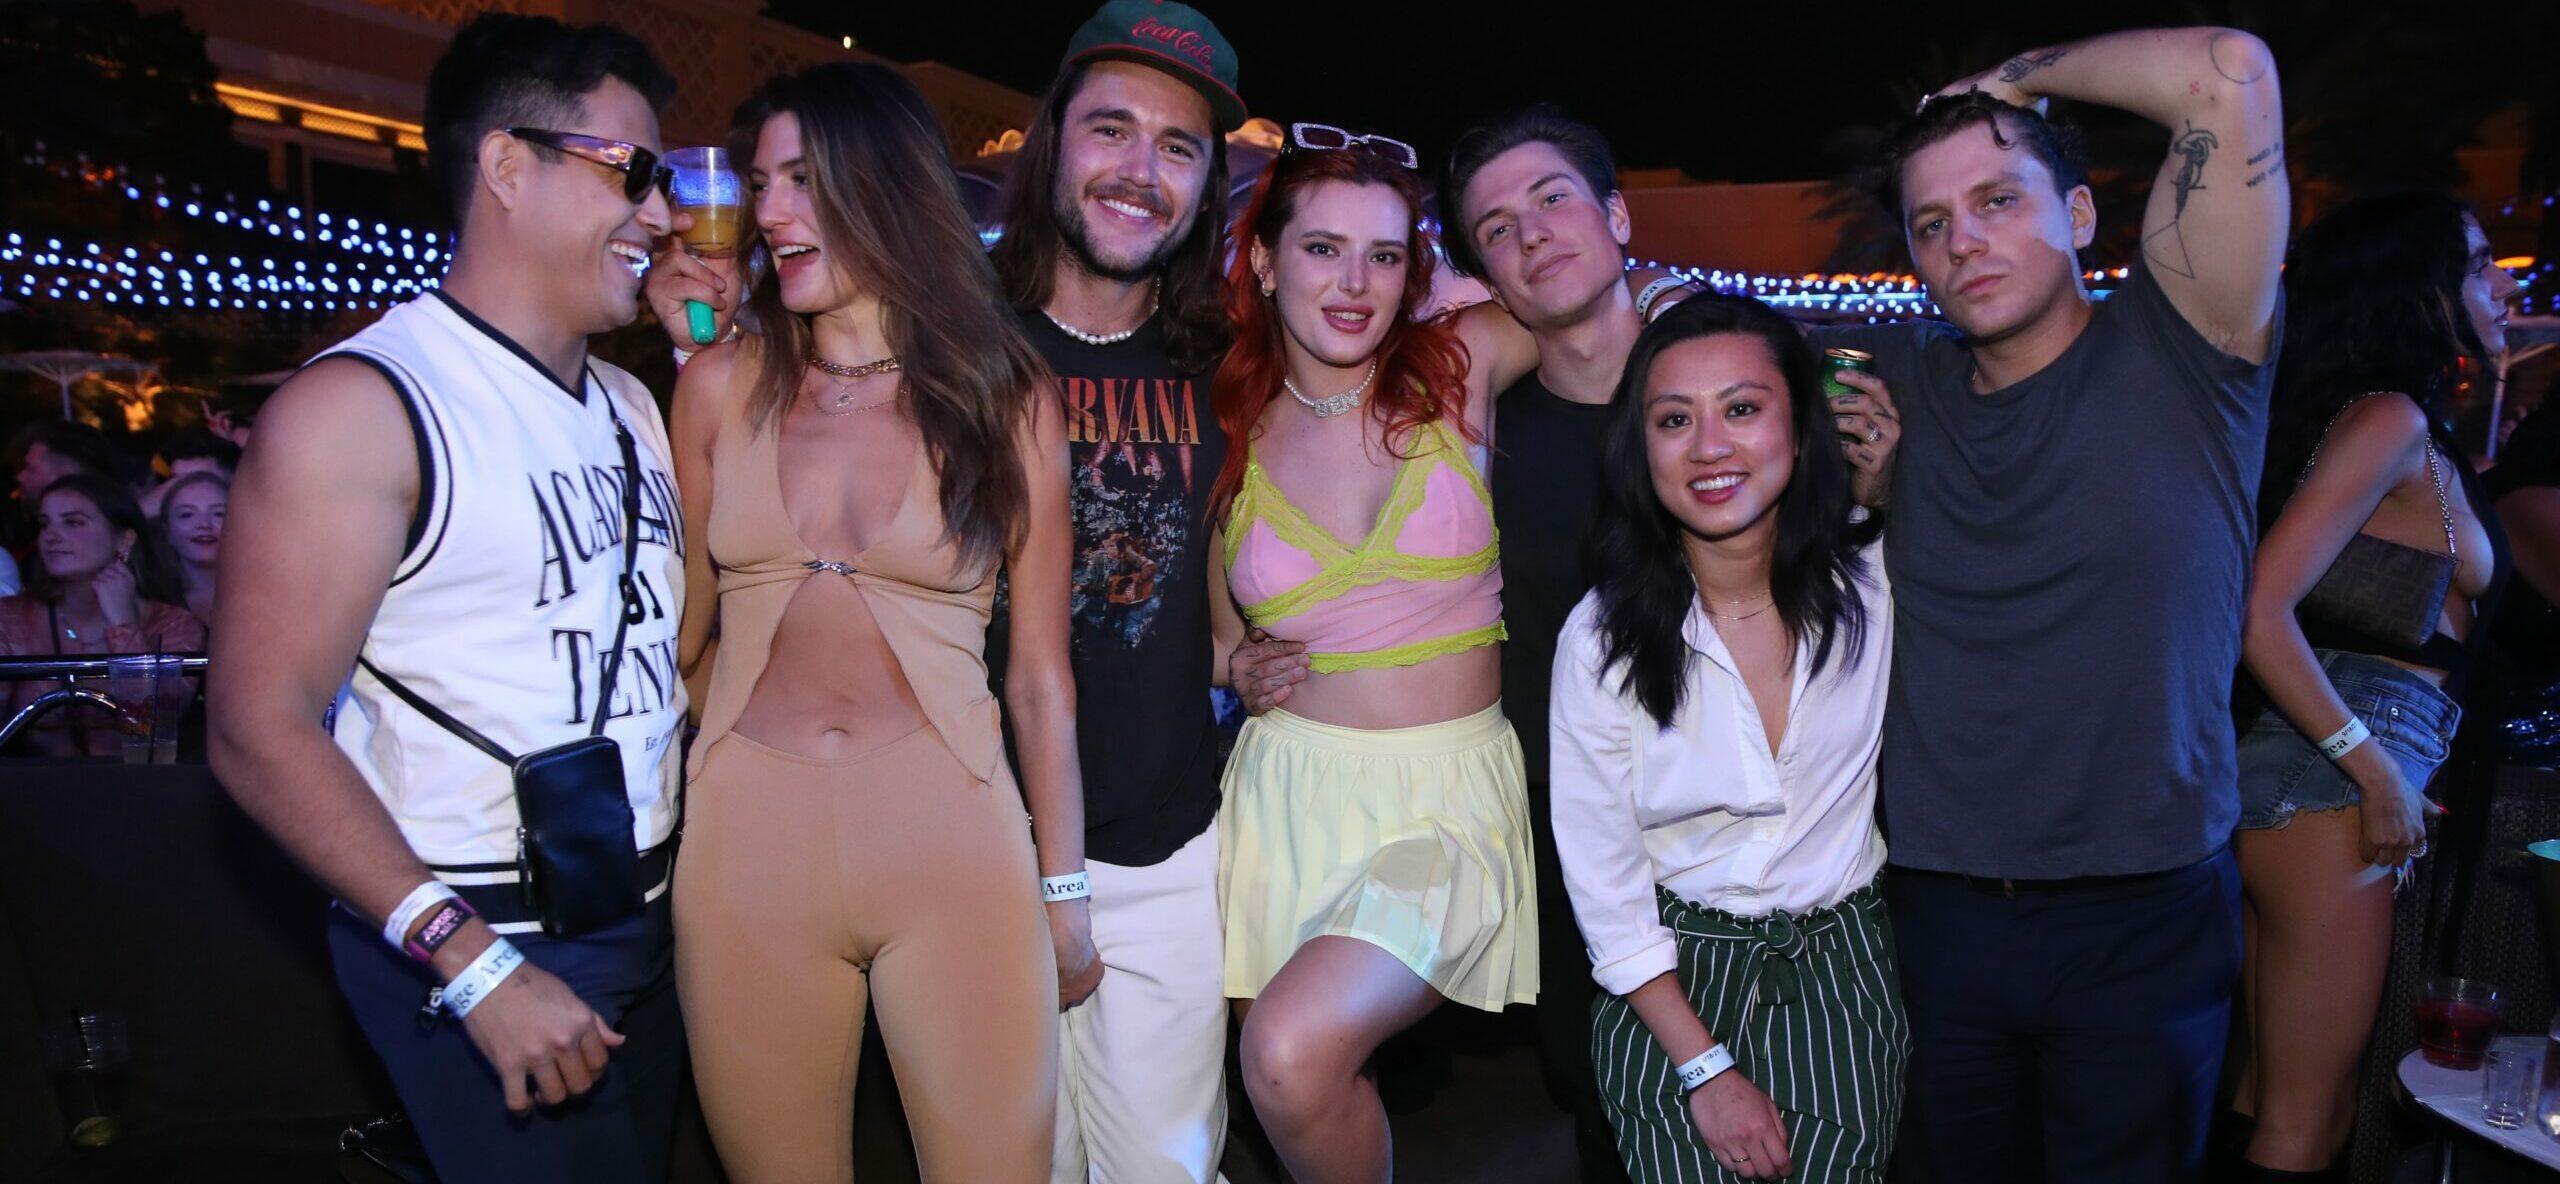 Bella Thorne Stuns At The Wynn, Las Vegas Partying With ‘The Chainsmokers’